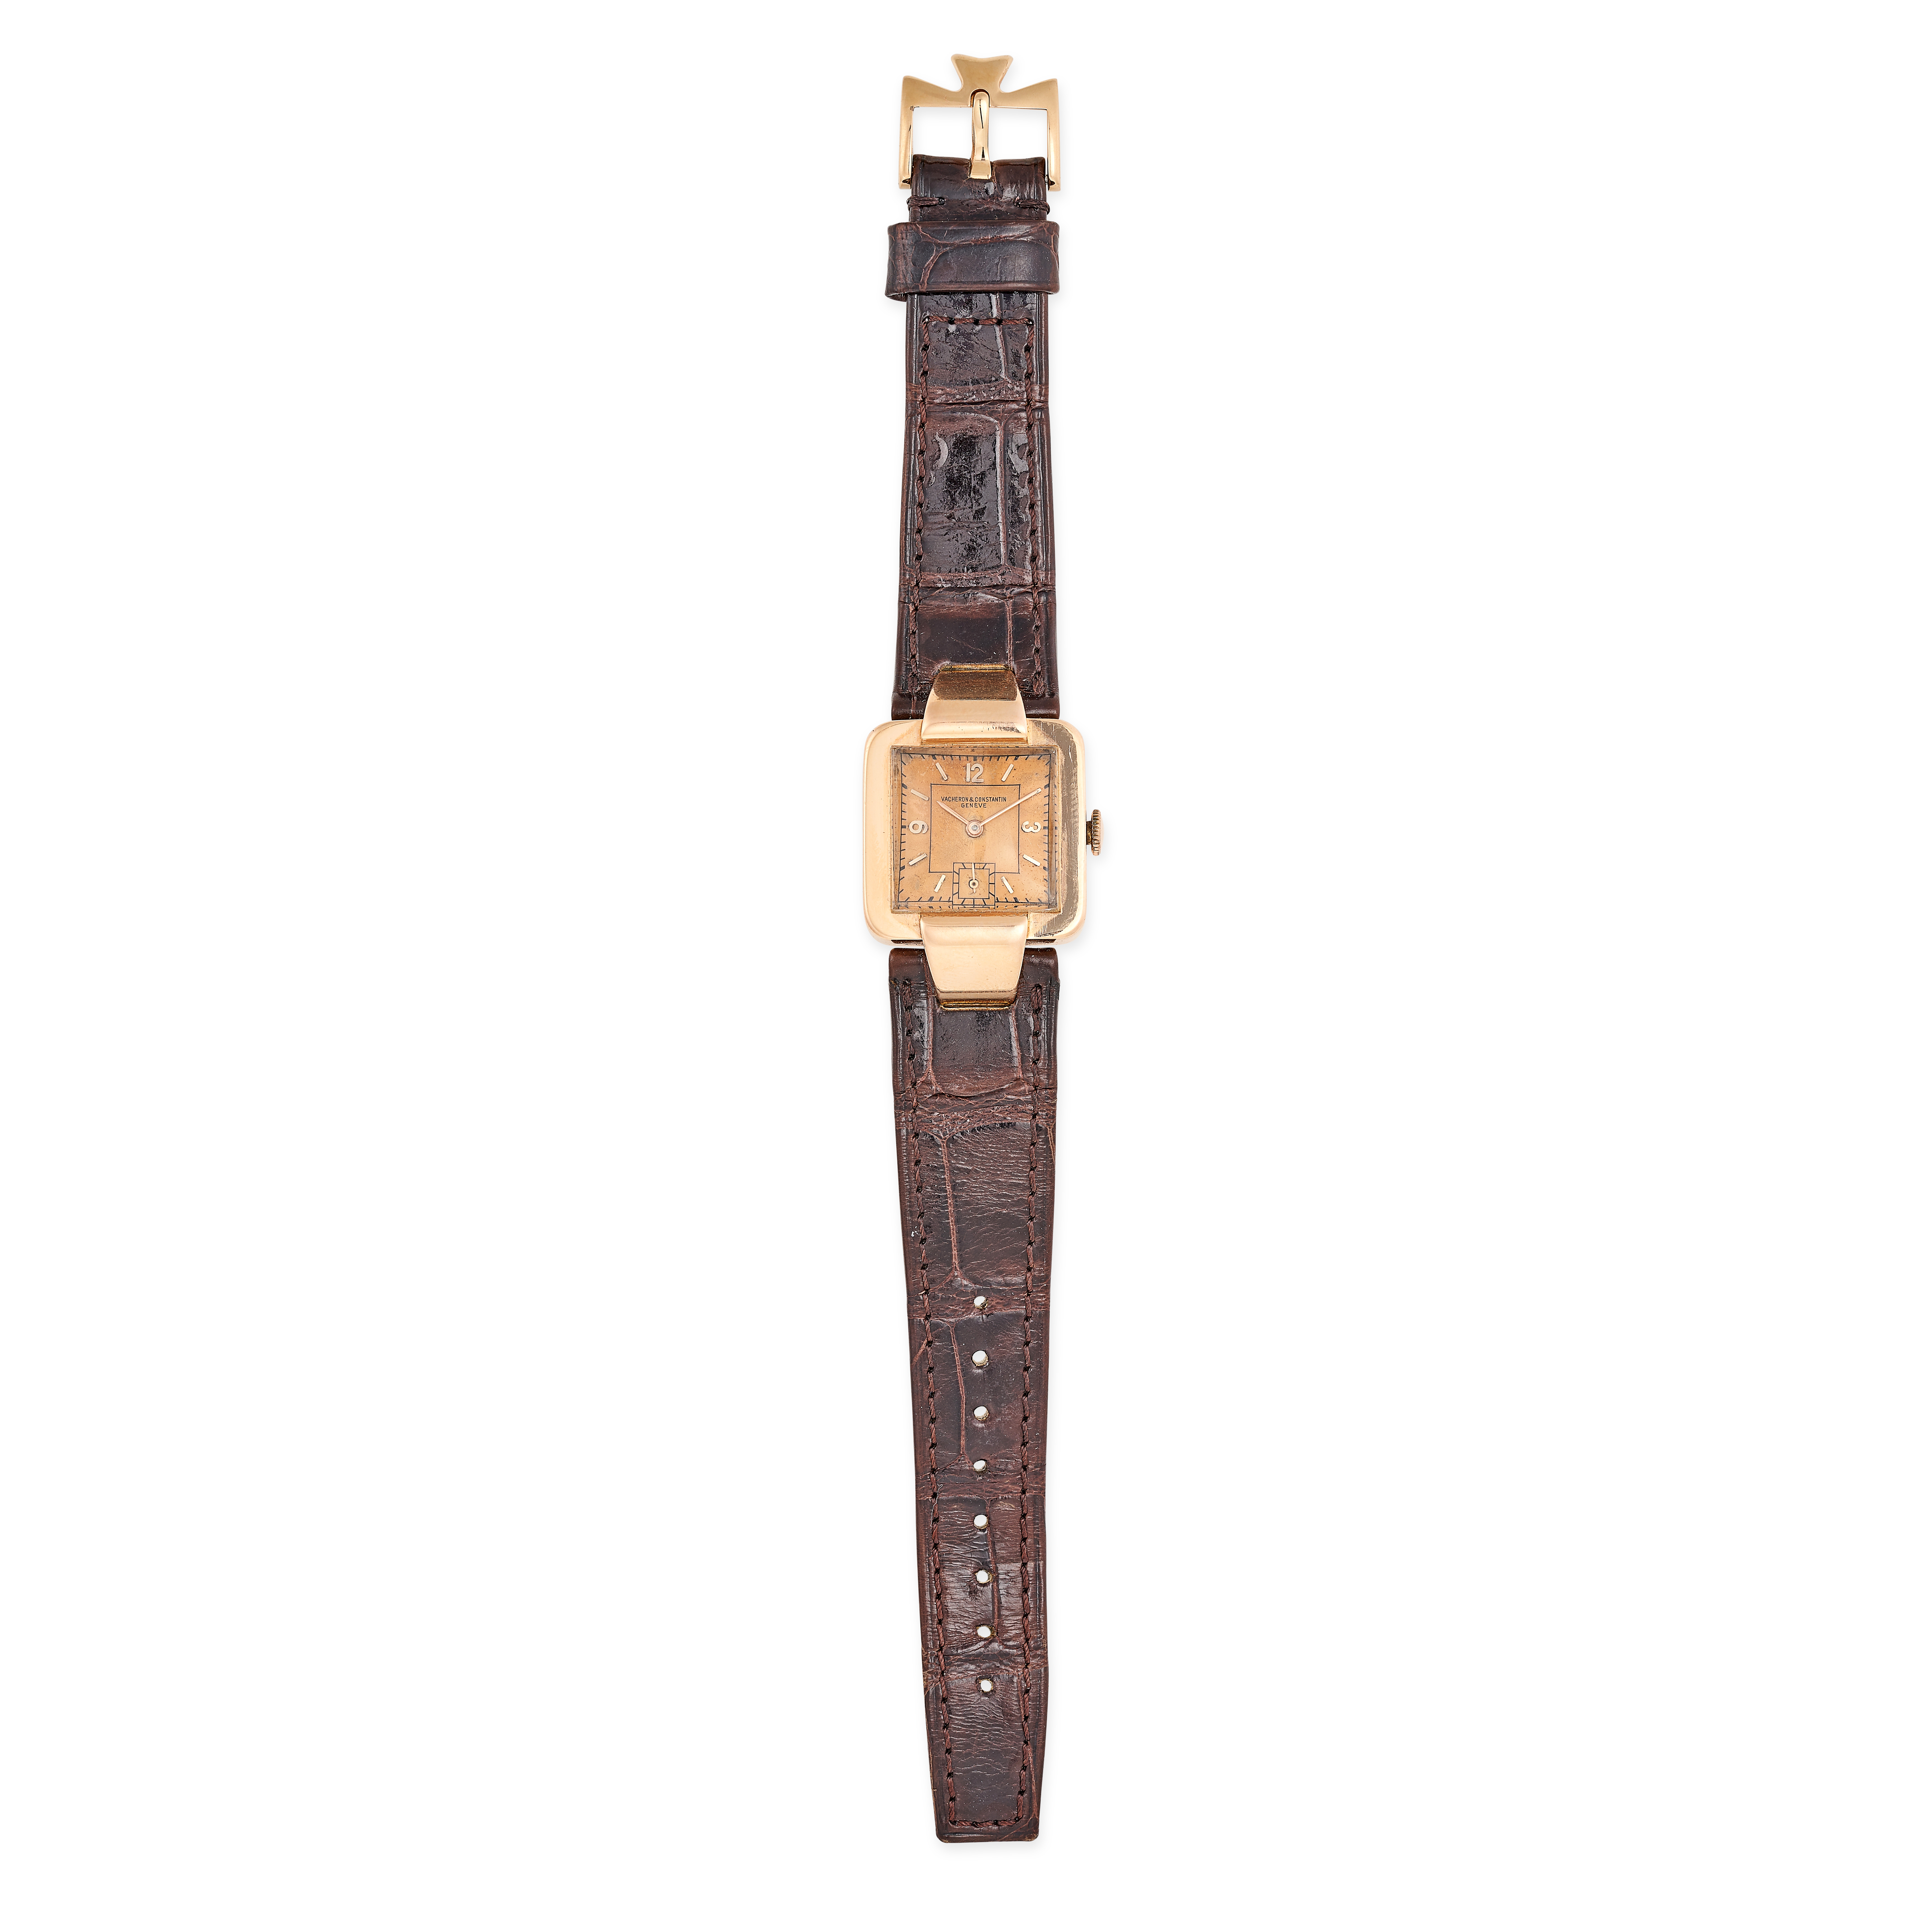 VACHERON & CONSTANTIN, A VINTAGE LADIES' WRISTWATCH in 18ct rose gold, with square face and tan dial